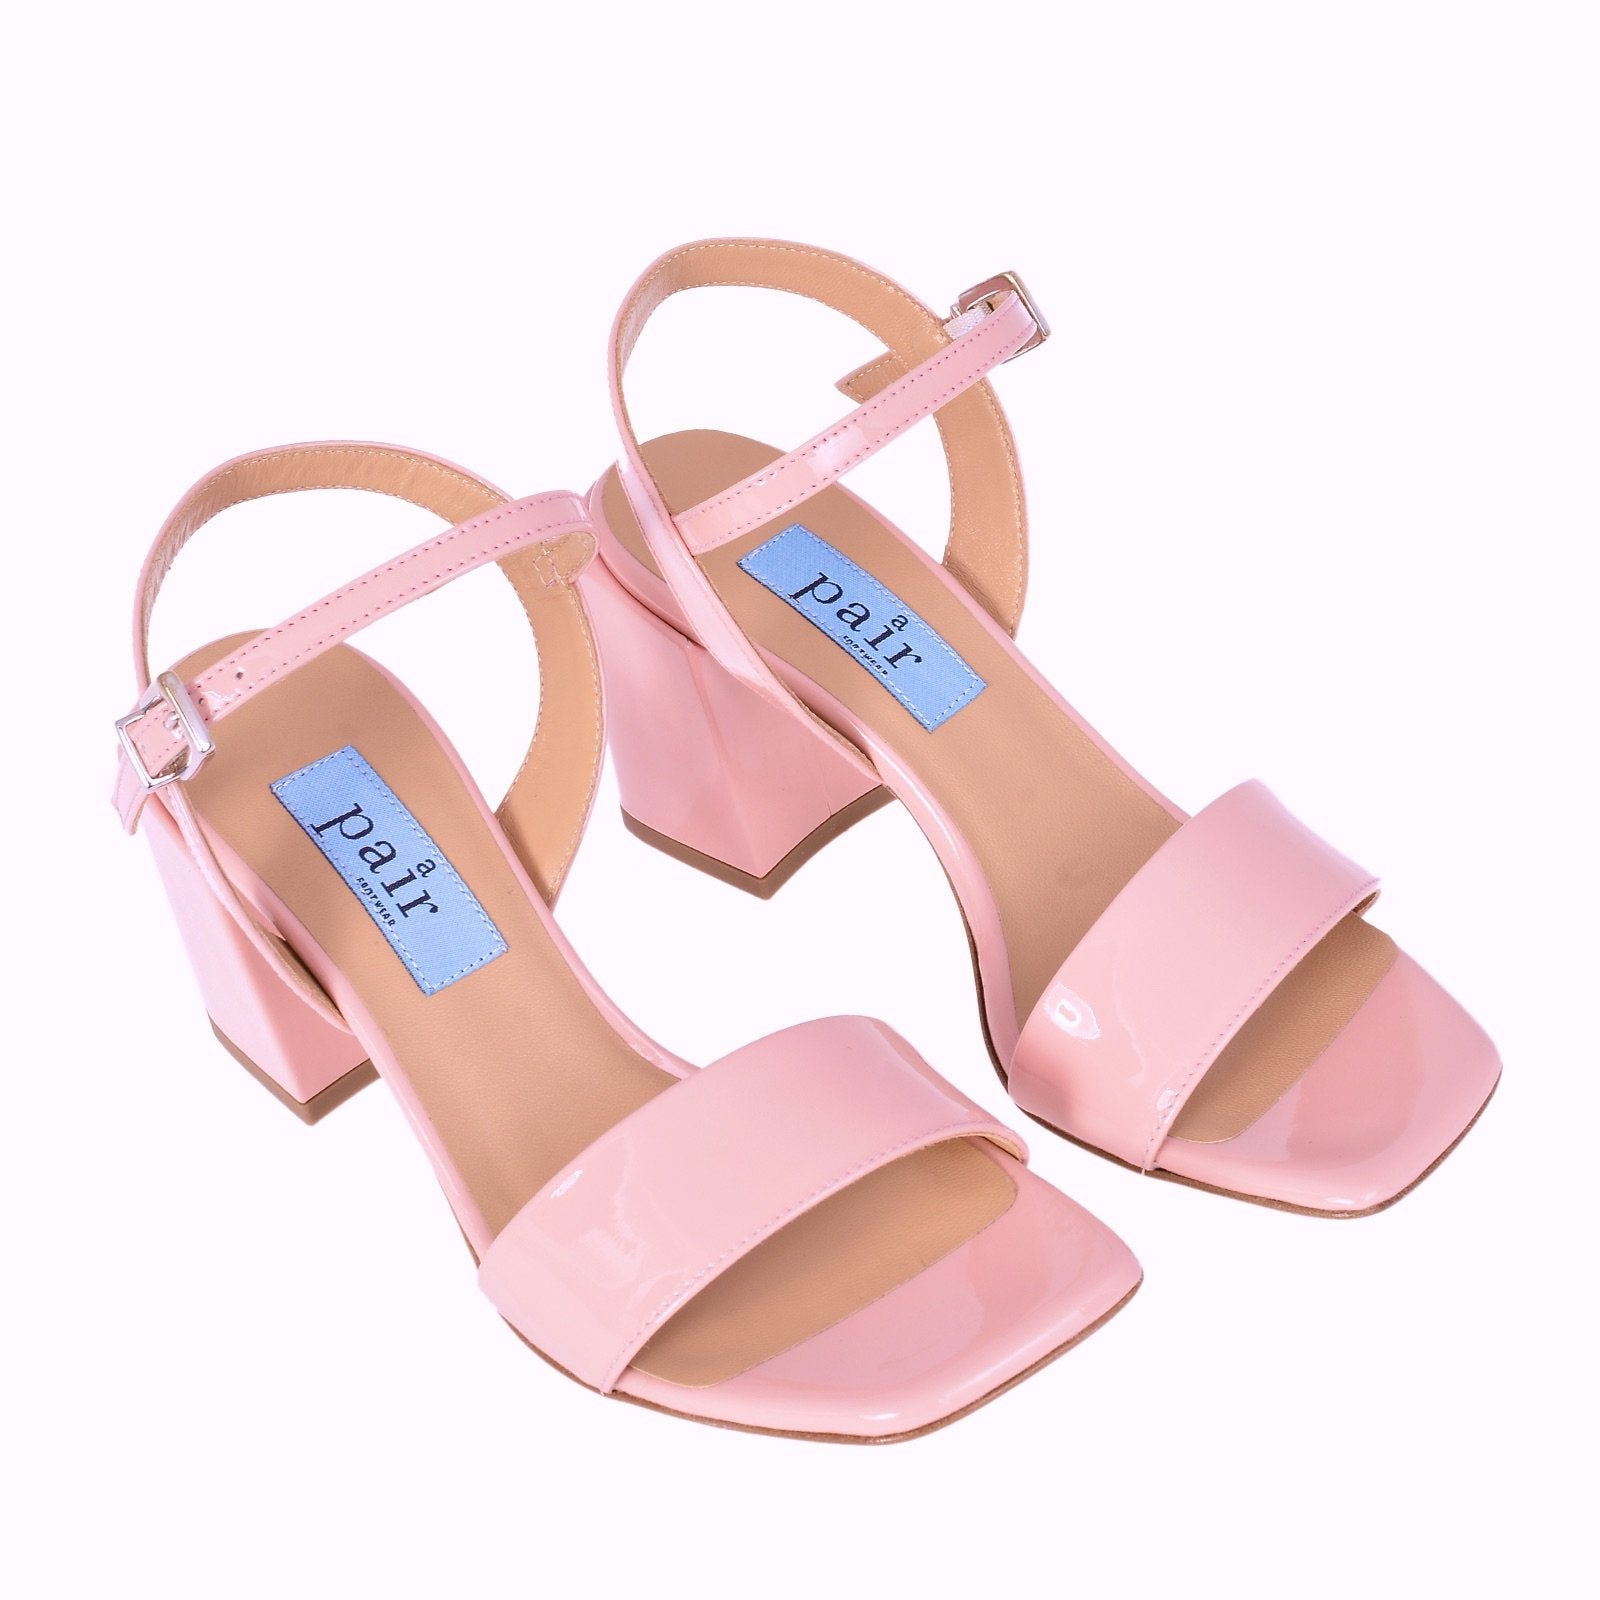 Chunky Classic Square Pink Patent Heeled Sandals LOS ANGELES1/PINK - 4